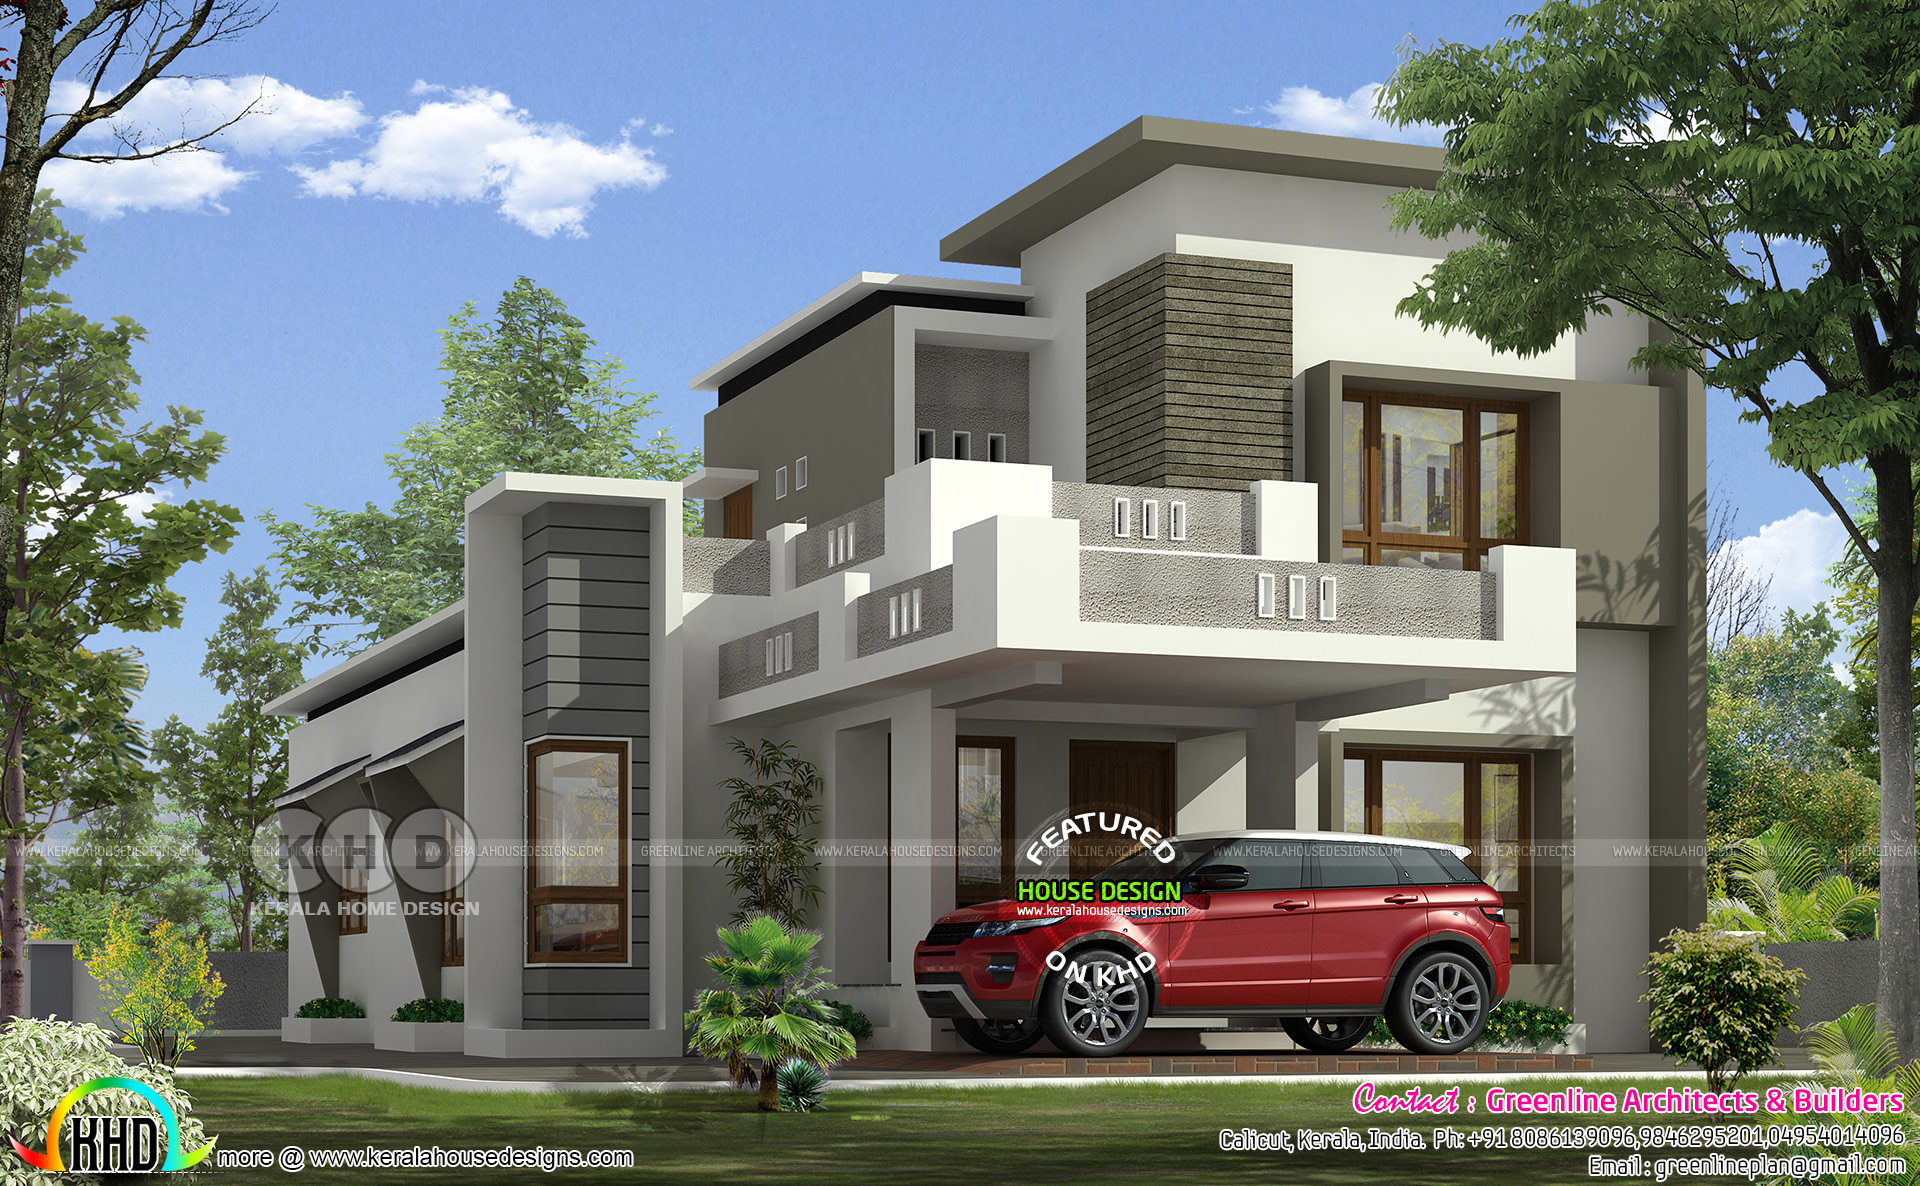 Low budget 1500 sq-ft ₹20 lakhs home - Kerala home design and floor